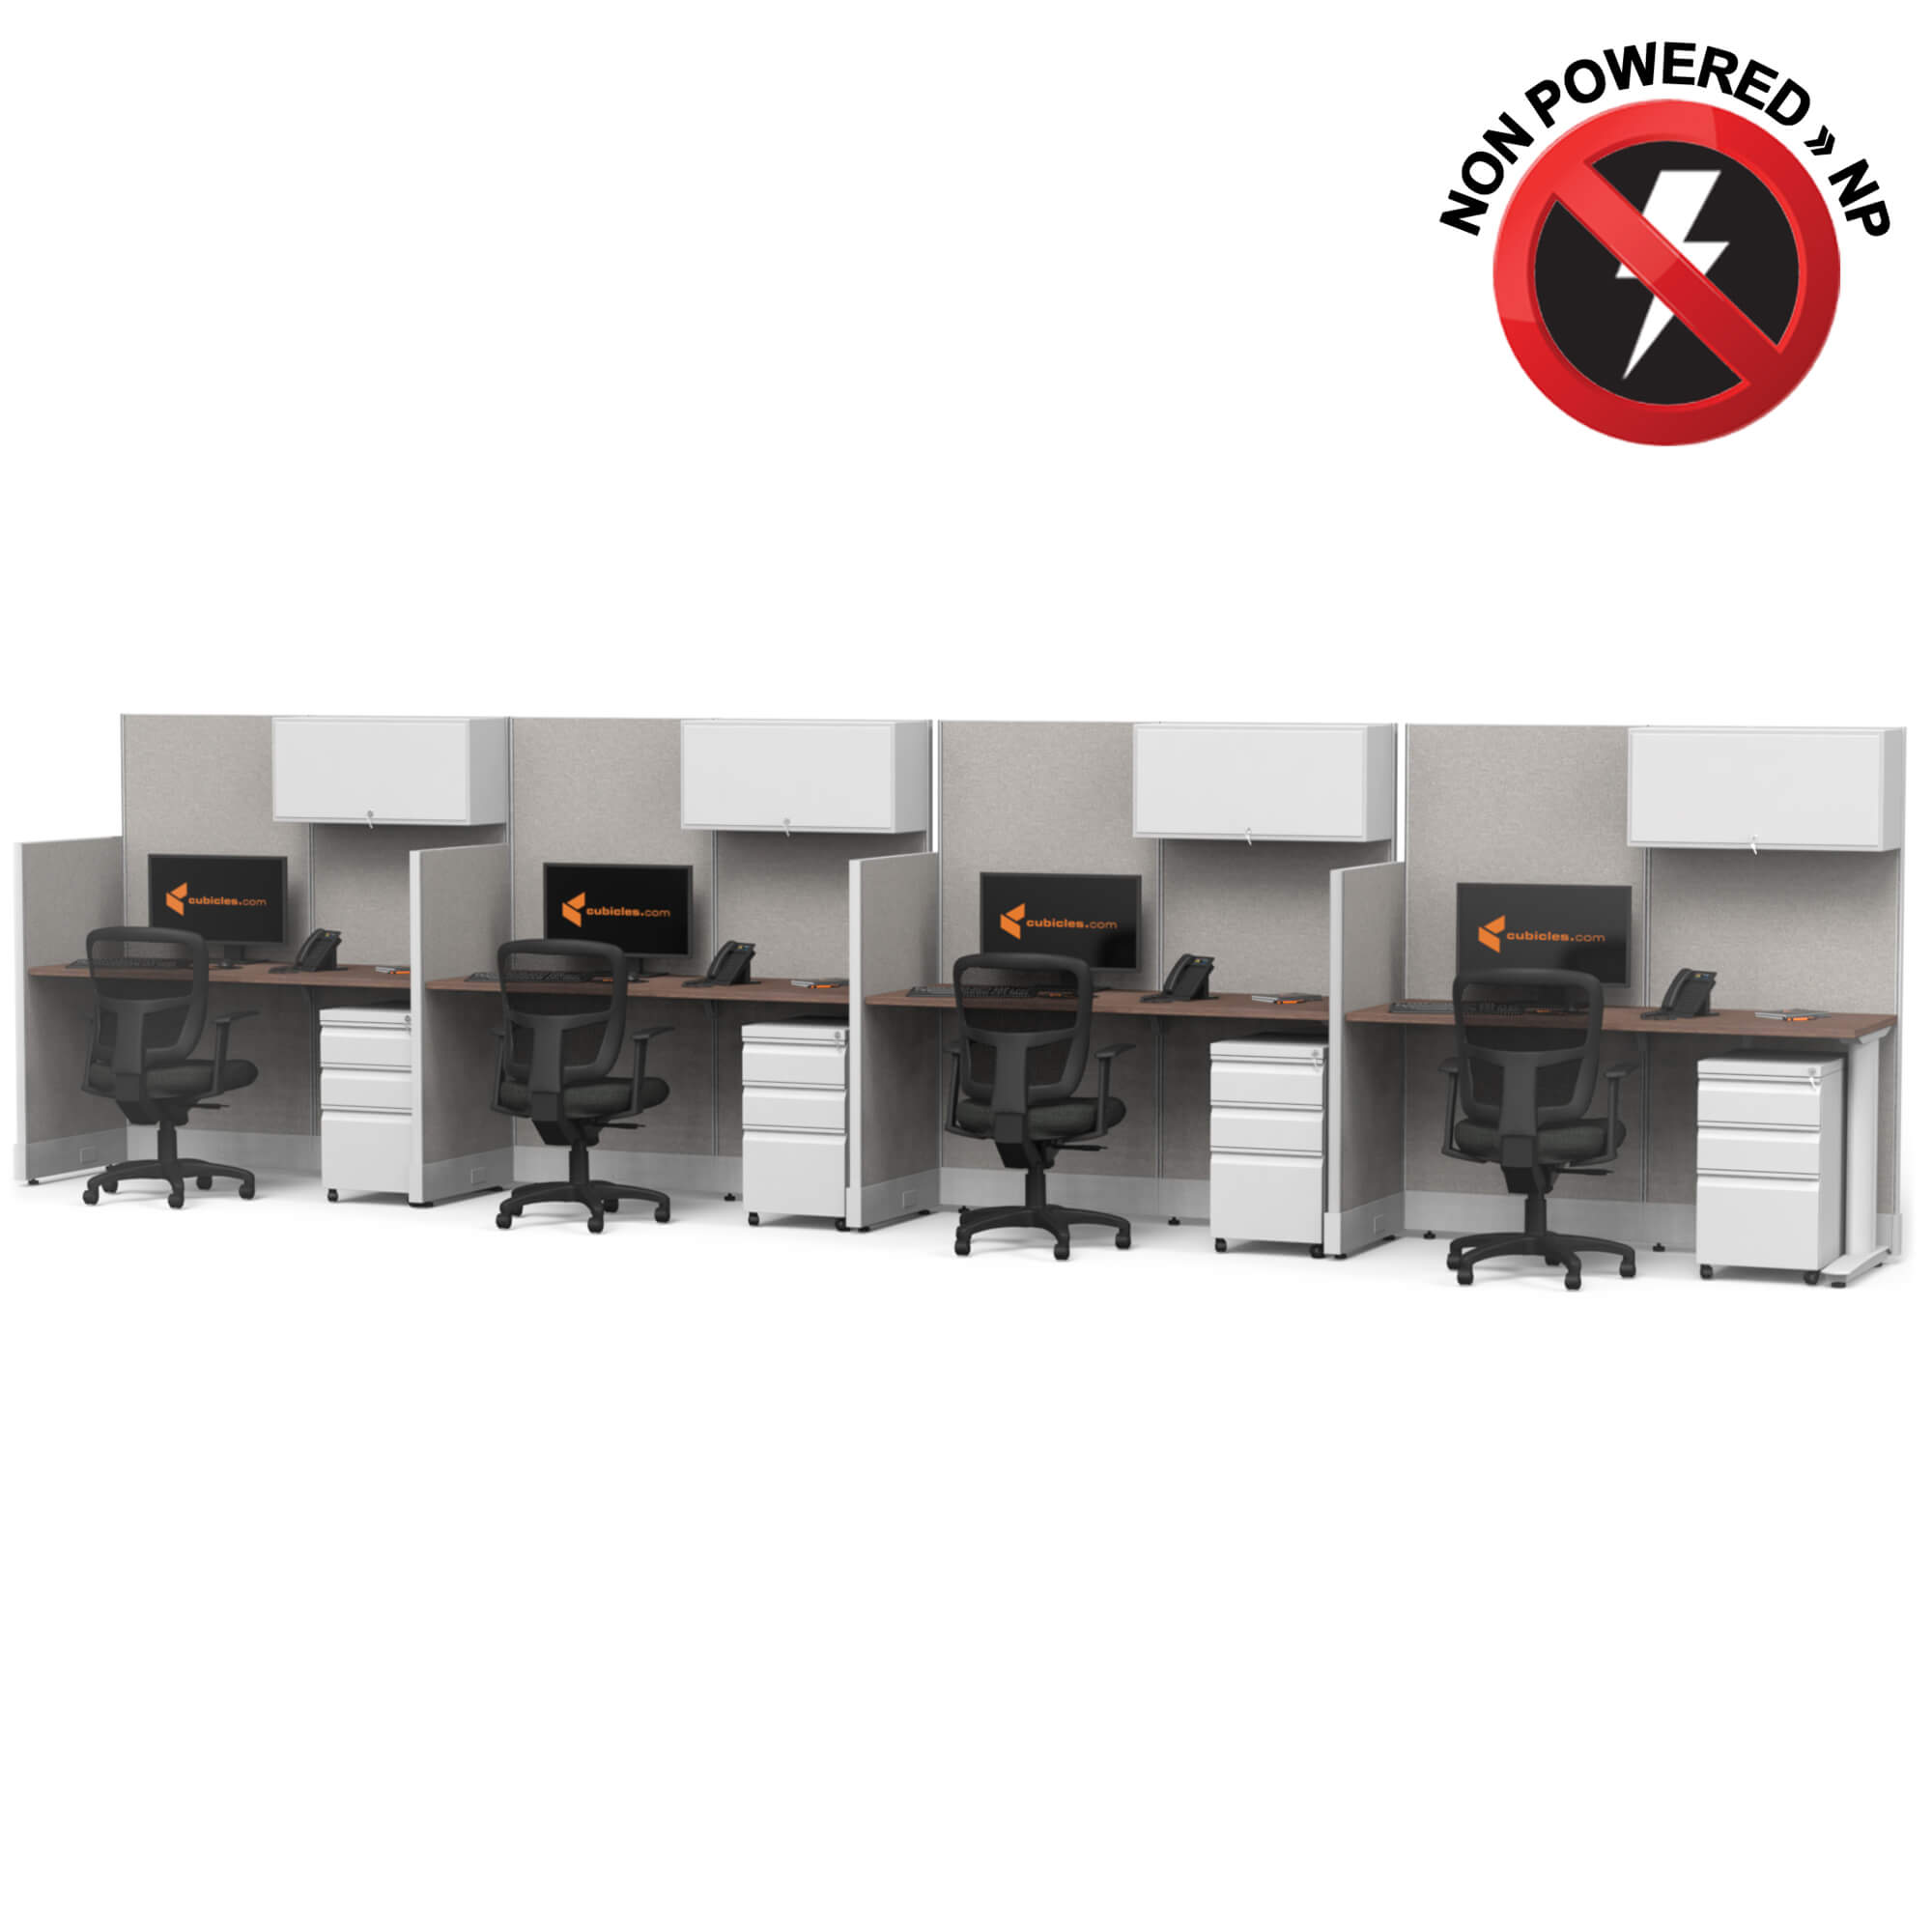 cubicle-desks-straight-workstation-4pack-inline-non-powered-with-storage-sign.jpg